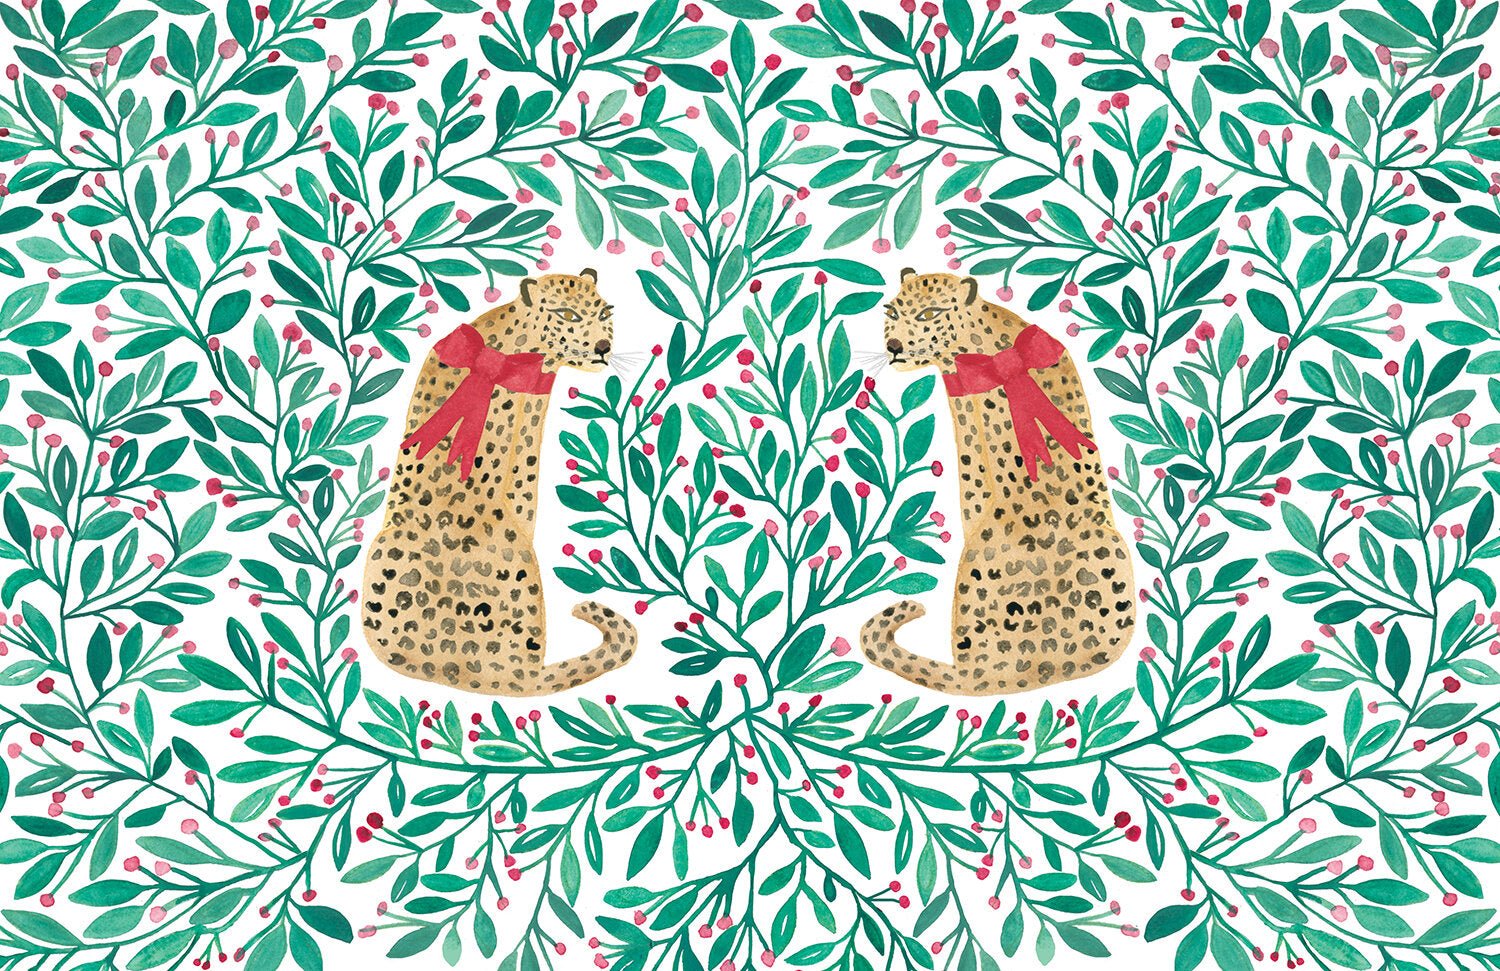 Holly berry patterned paper placemat with two leopards